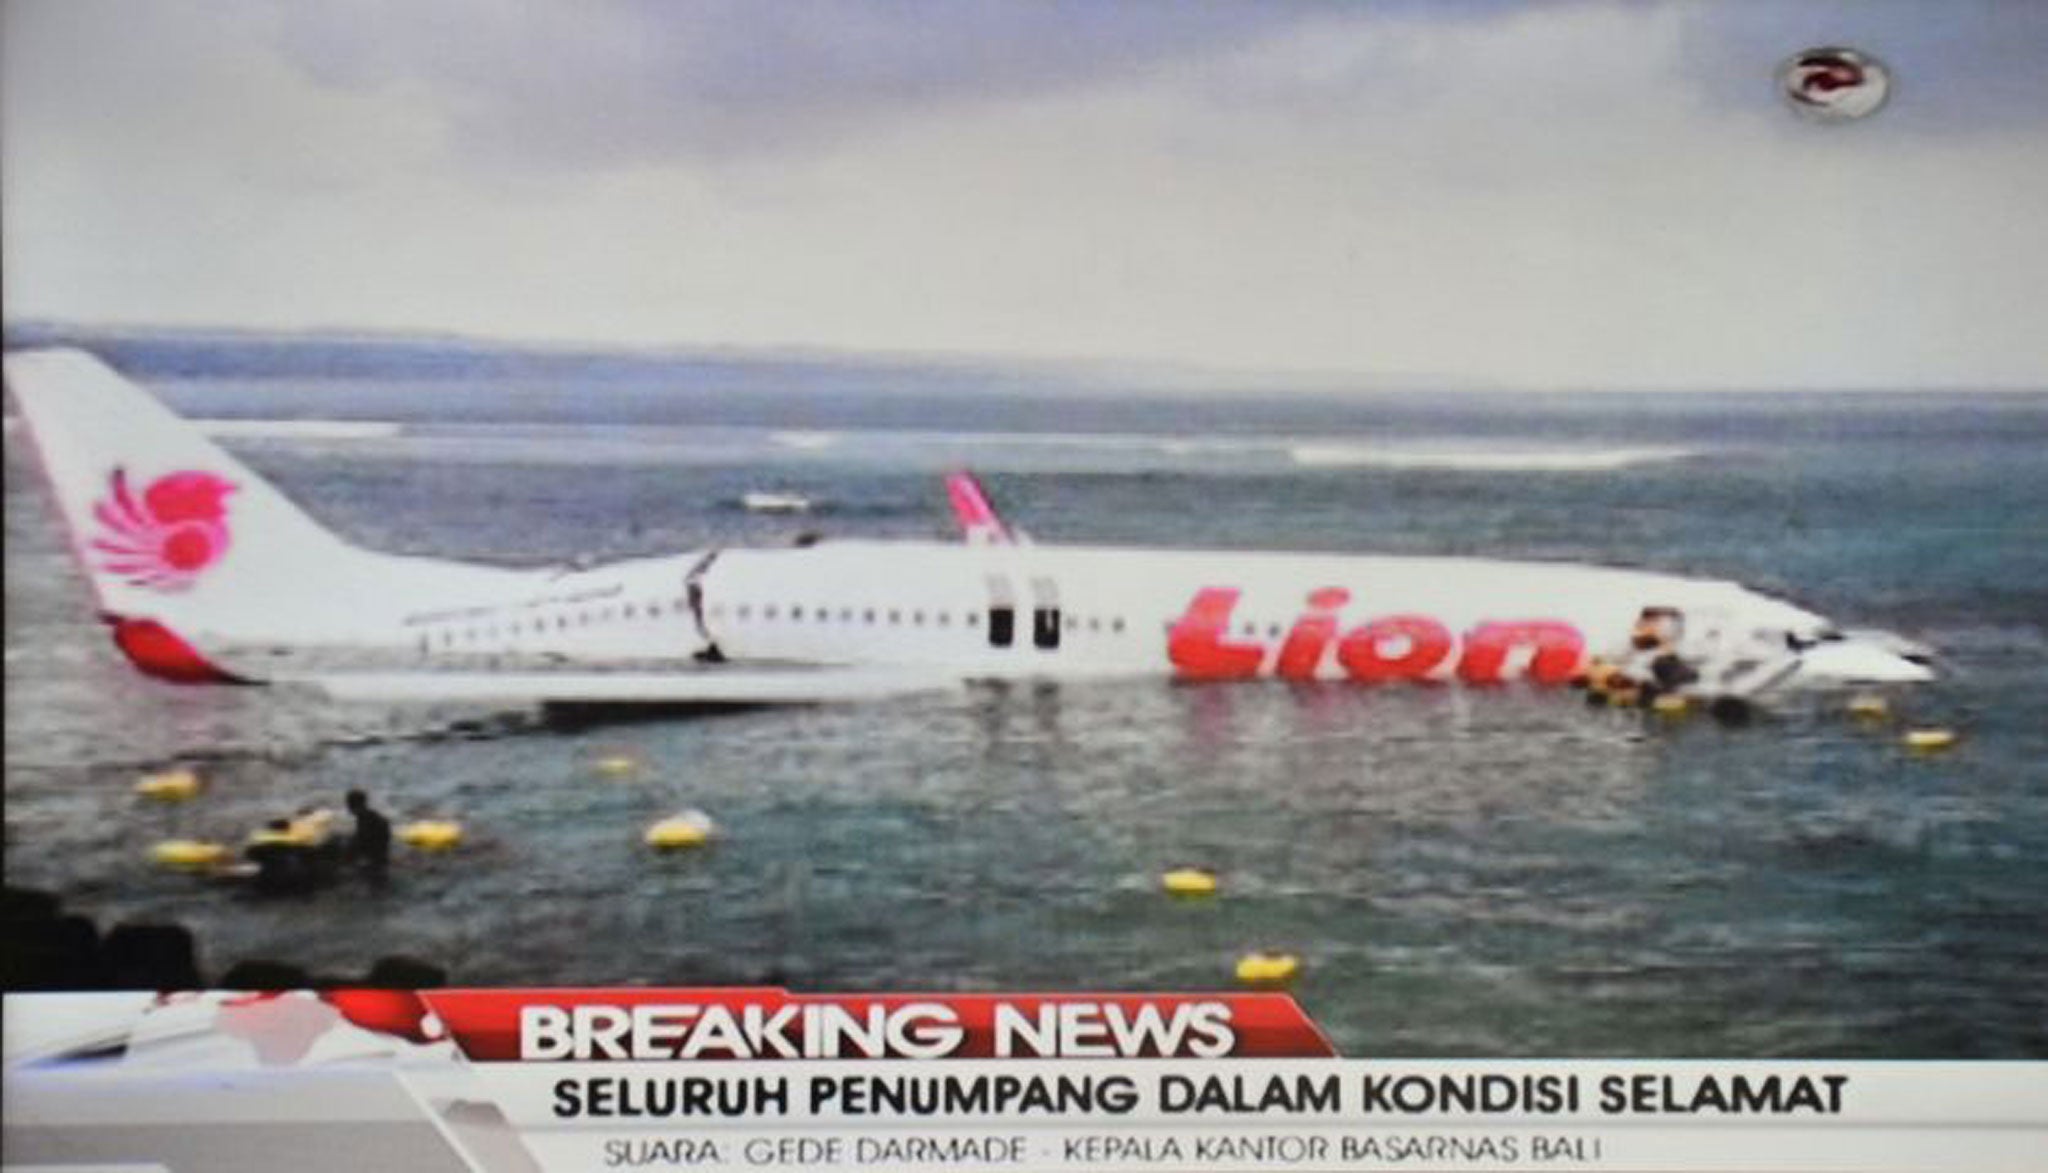 This television grab taken from Indonesia's TV One on April 13, 2013 shows a Lion Air Boeing 737 jet that overshot the runway during landing, sitting in the water at Bali's international airport near Denpasar.